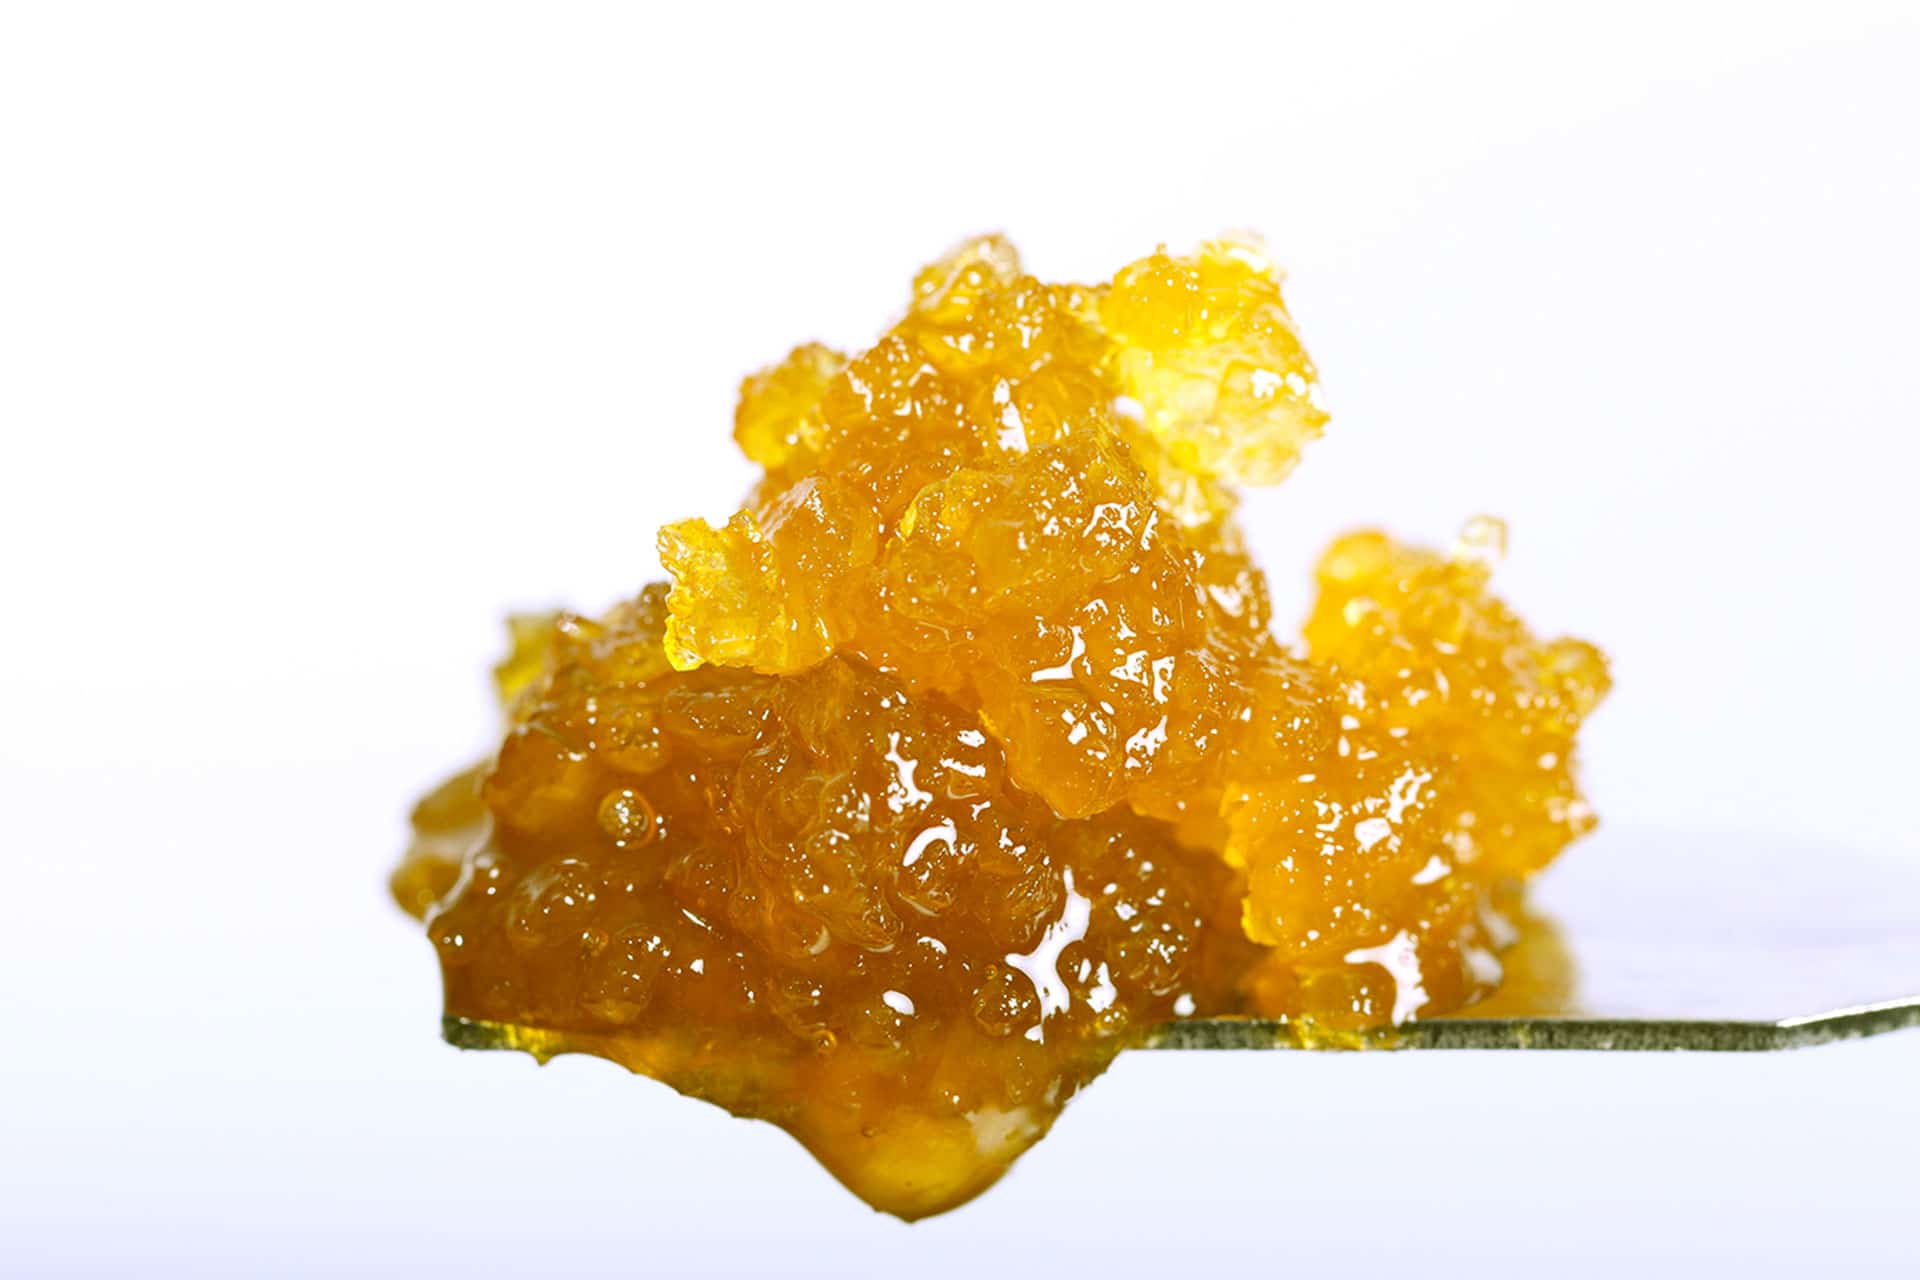 Seed & Smith live resin concentrate